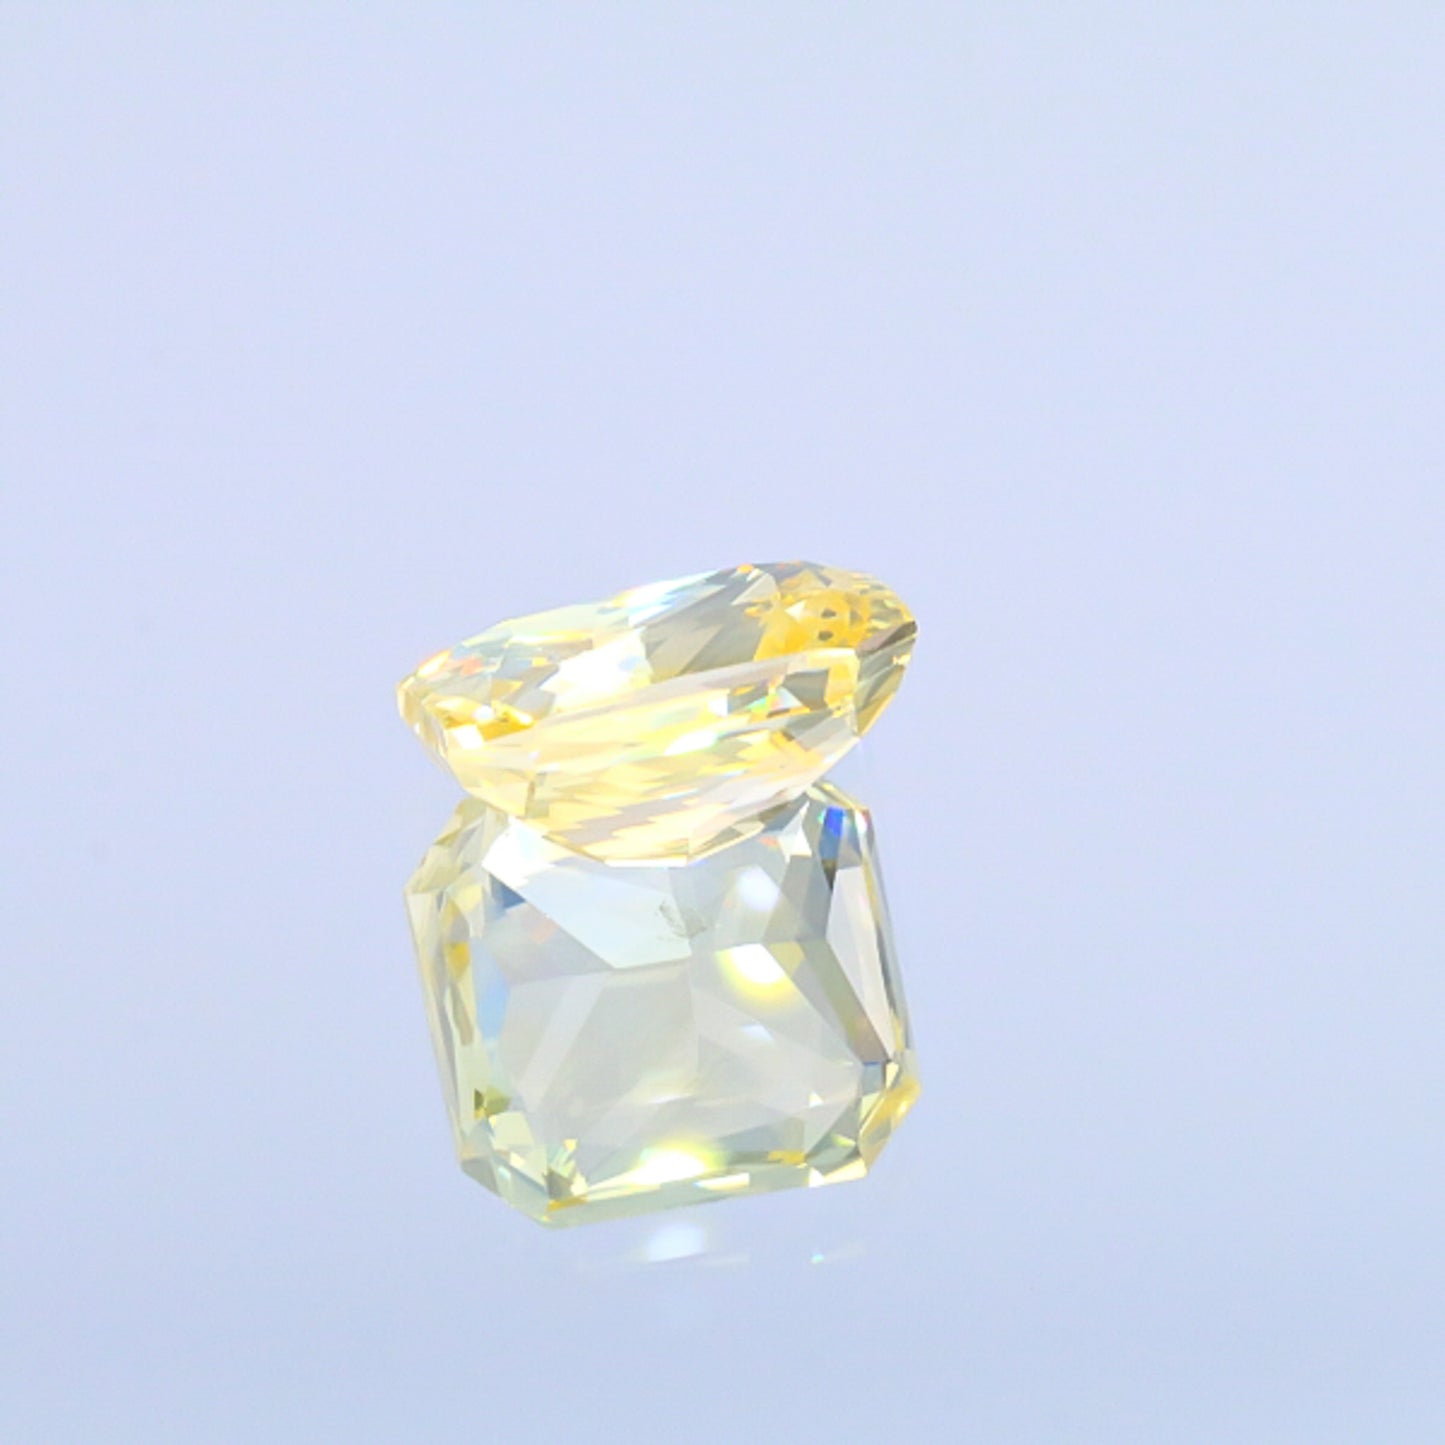 Natural Unheated Yellow Sapphire 11.52 Carats With GIA Report